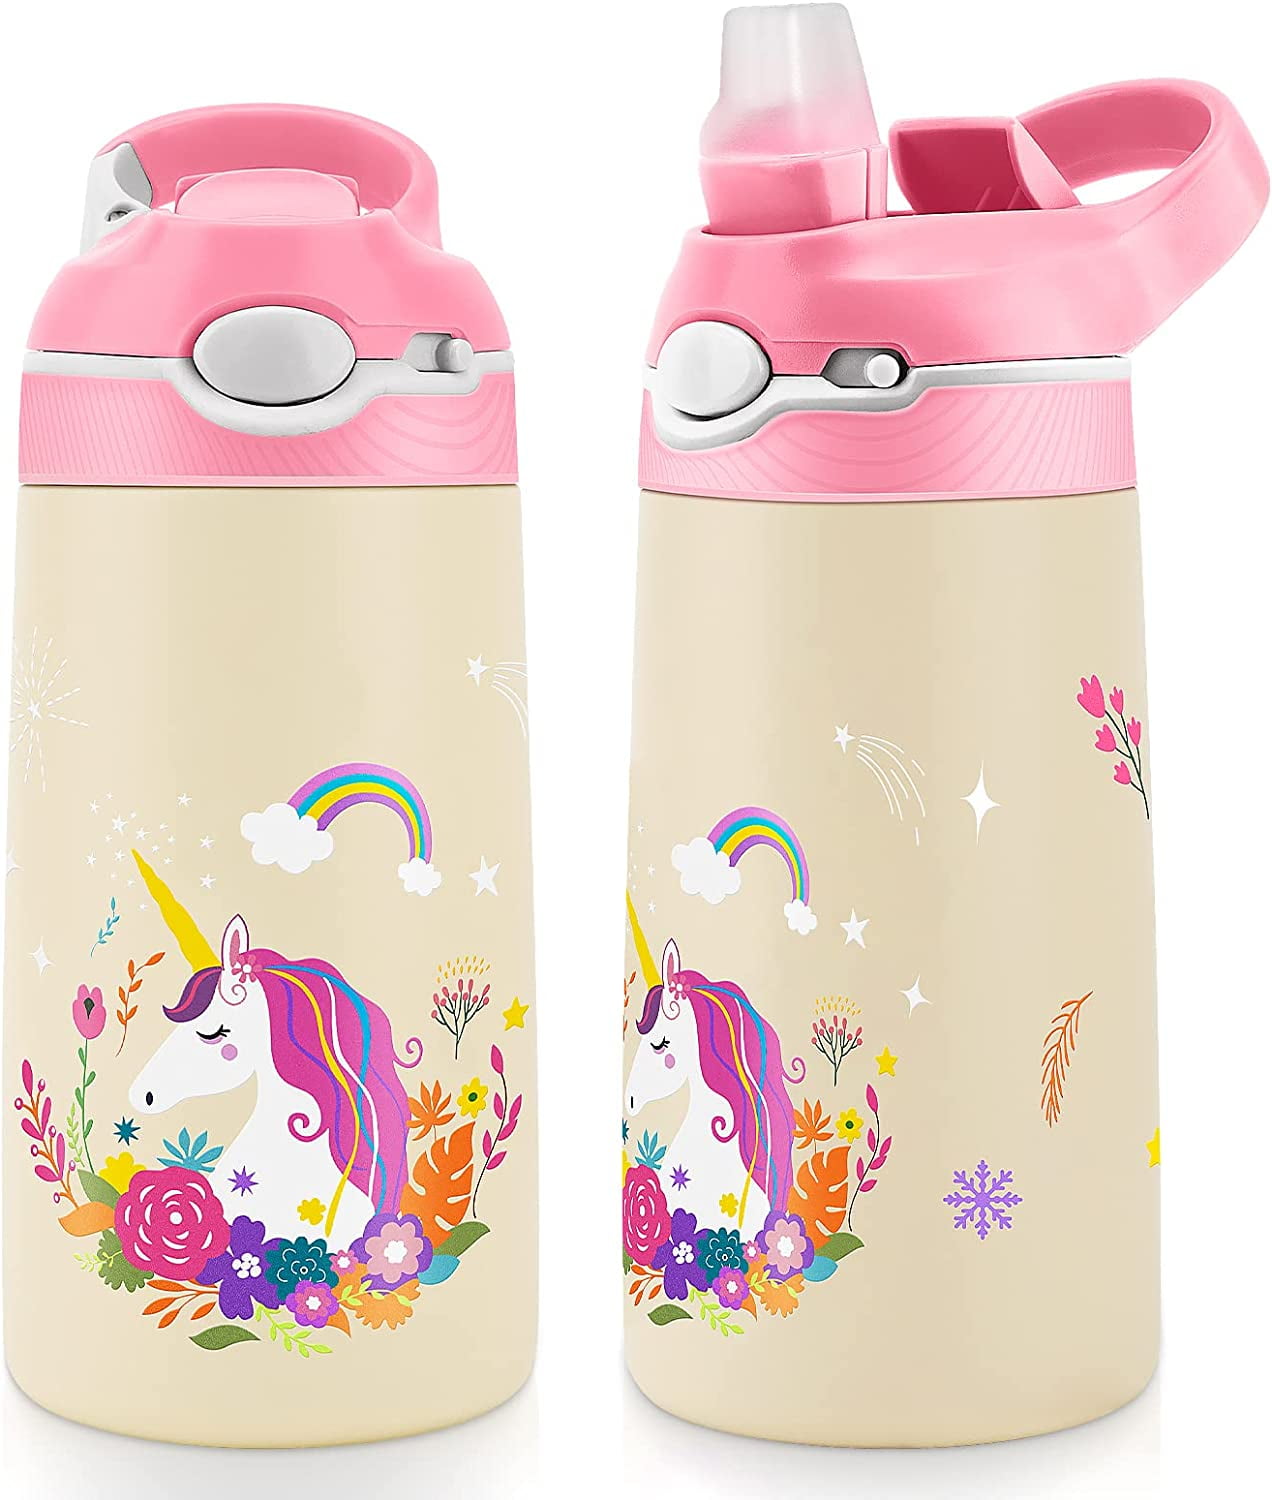  HQAYW Girls Water Bottles for School, 14oz Kids Water Bottle  Stainless Steel, Insulated Water Bottle with Straw Cap Leakproof,  Wide-Mouth BPA Free Tumbler Cups Metal Canteen for Sports, Unicorn: Home 